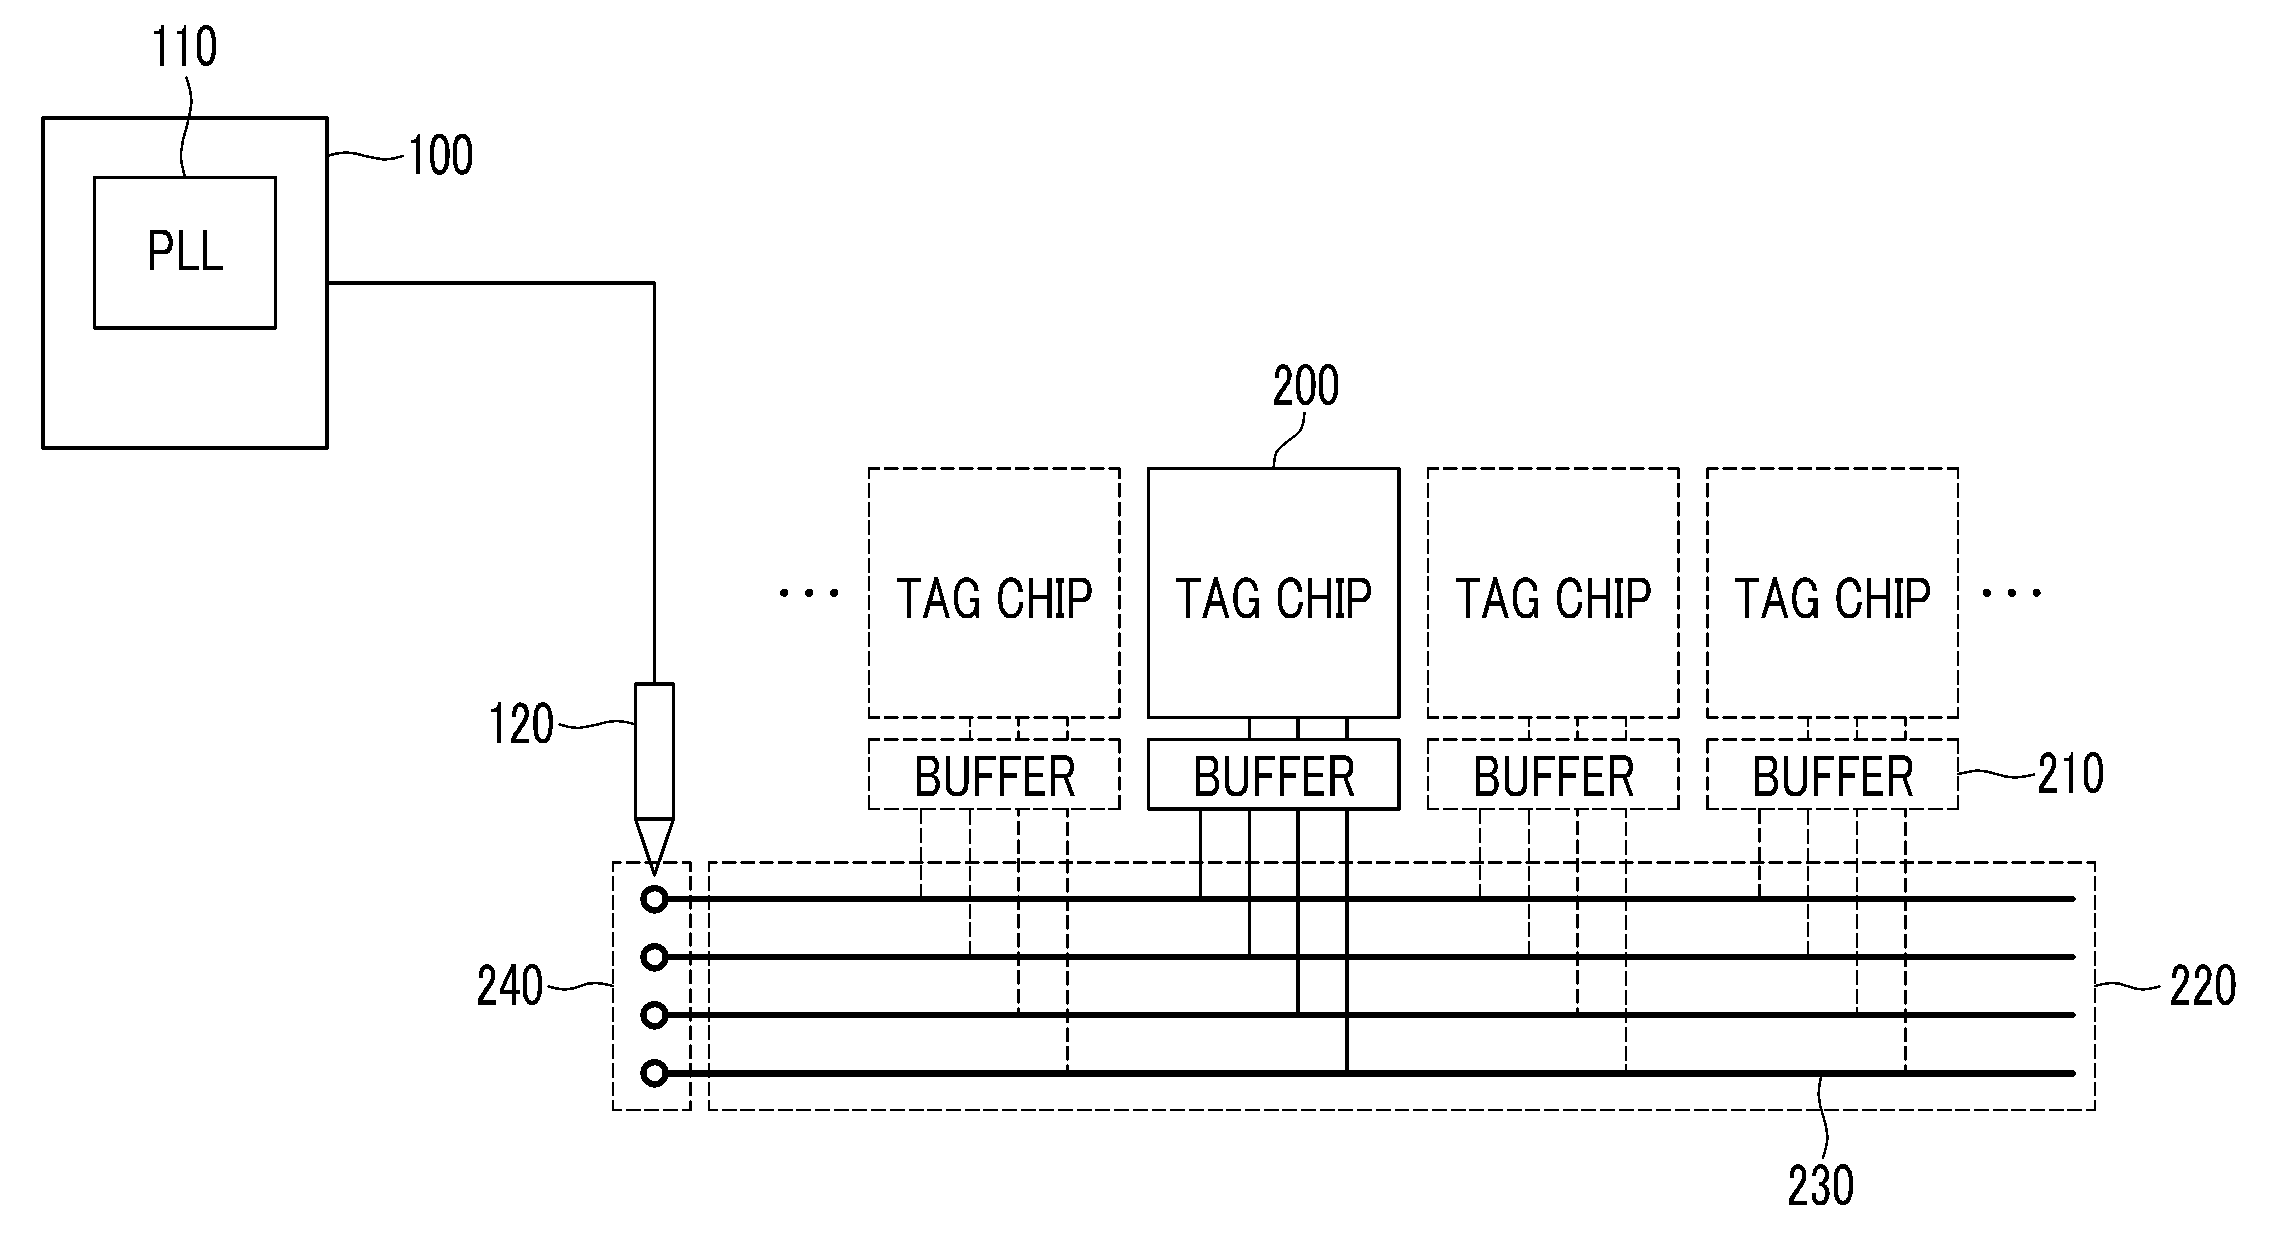 Semiconductor wafer and method for auto-calibrating integrated circuit chips using pll at wafer level